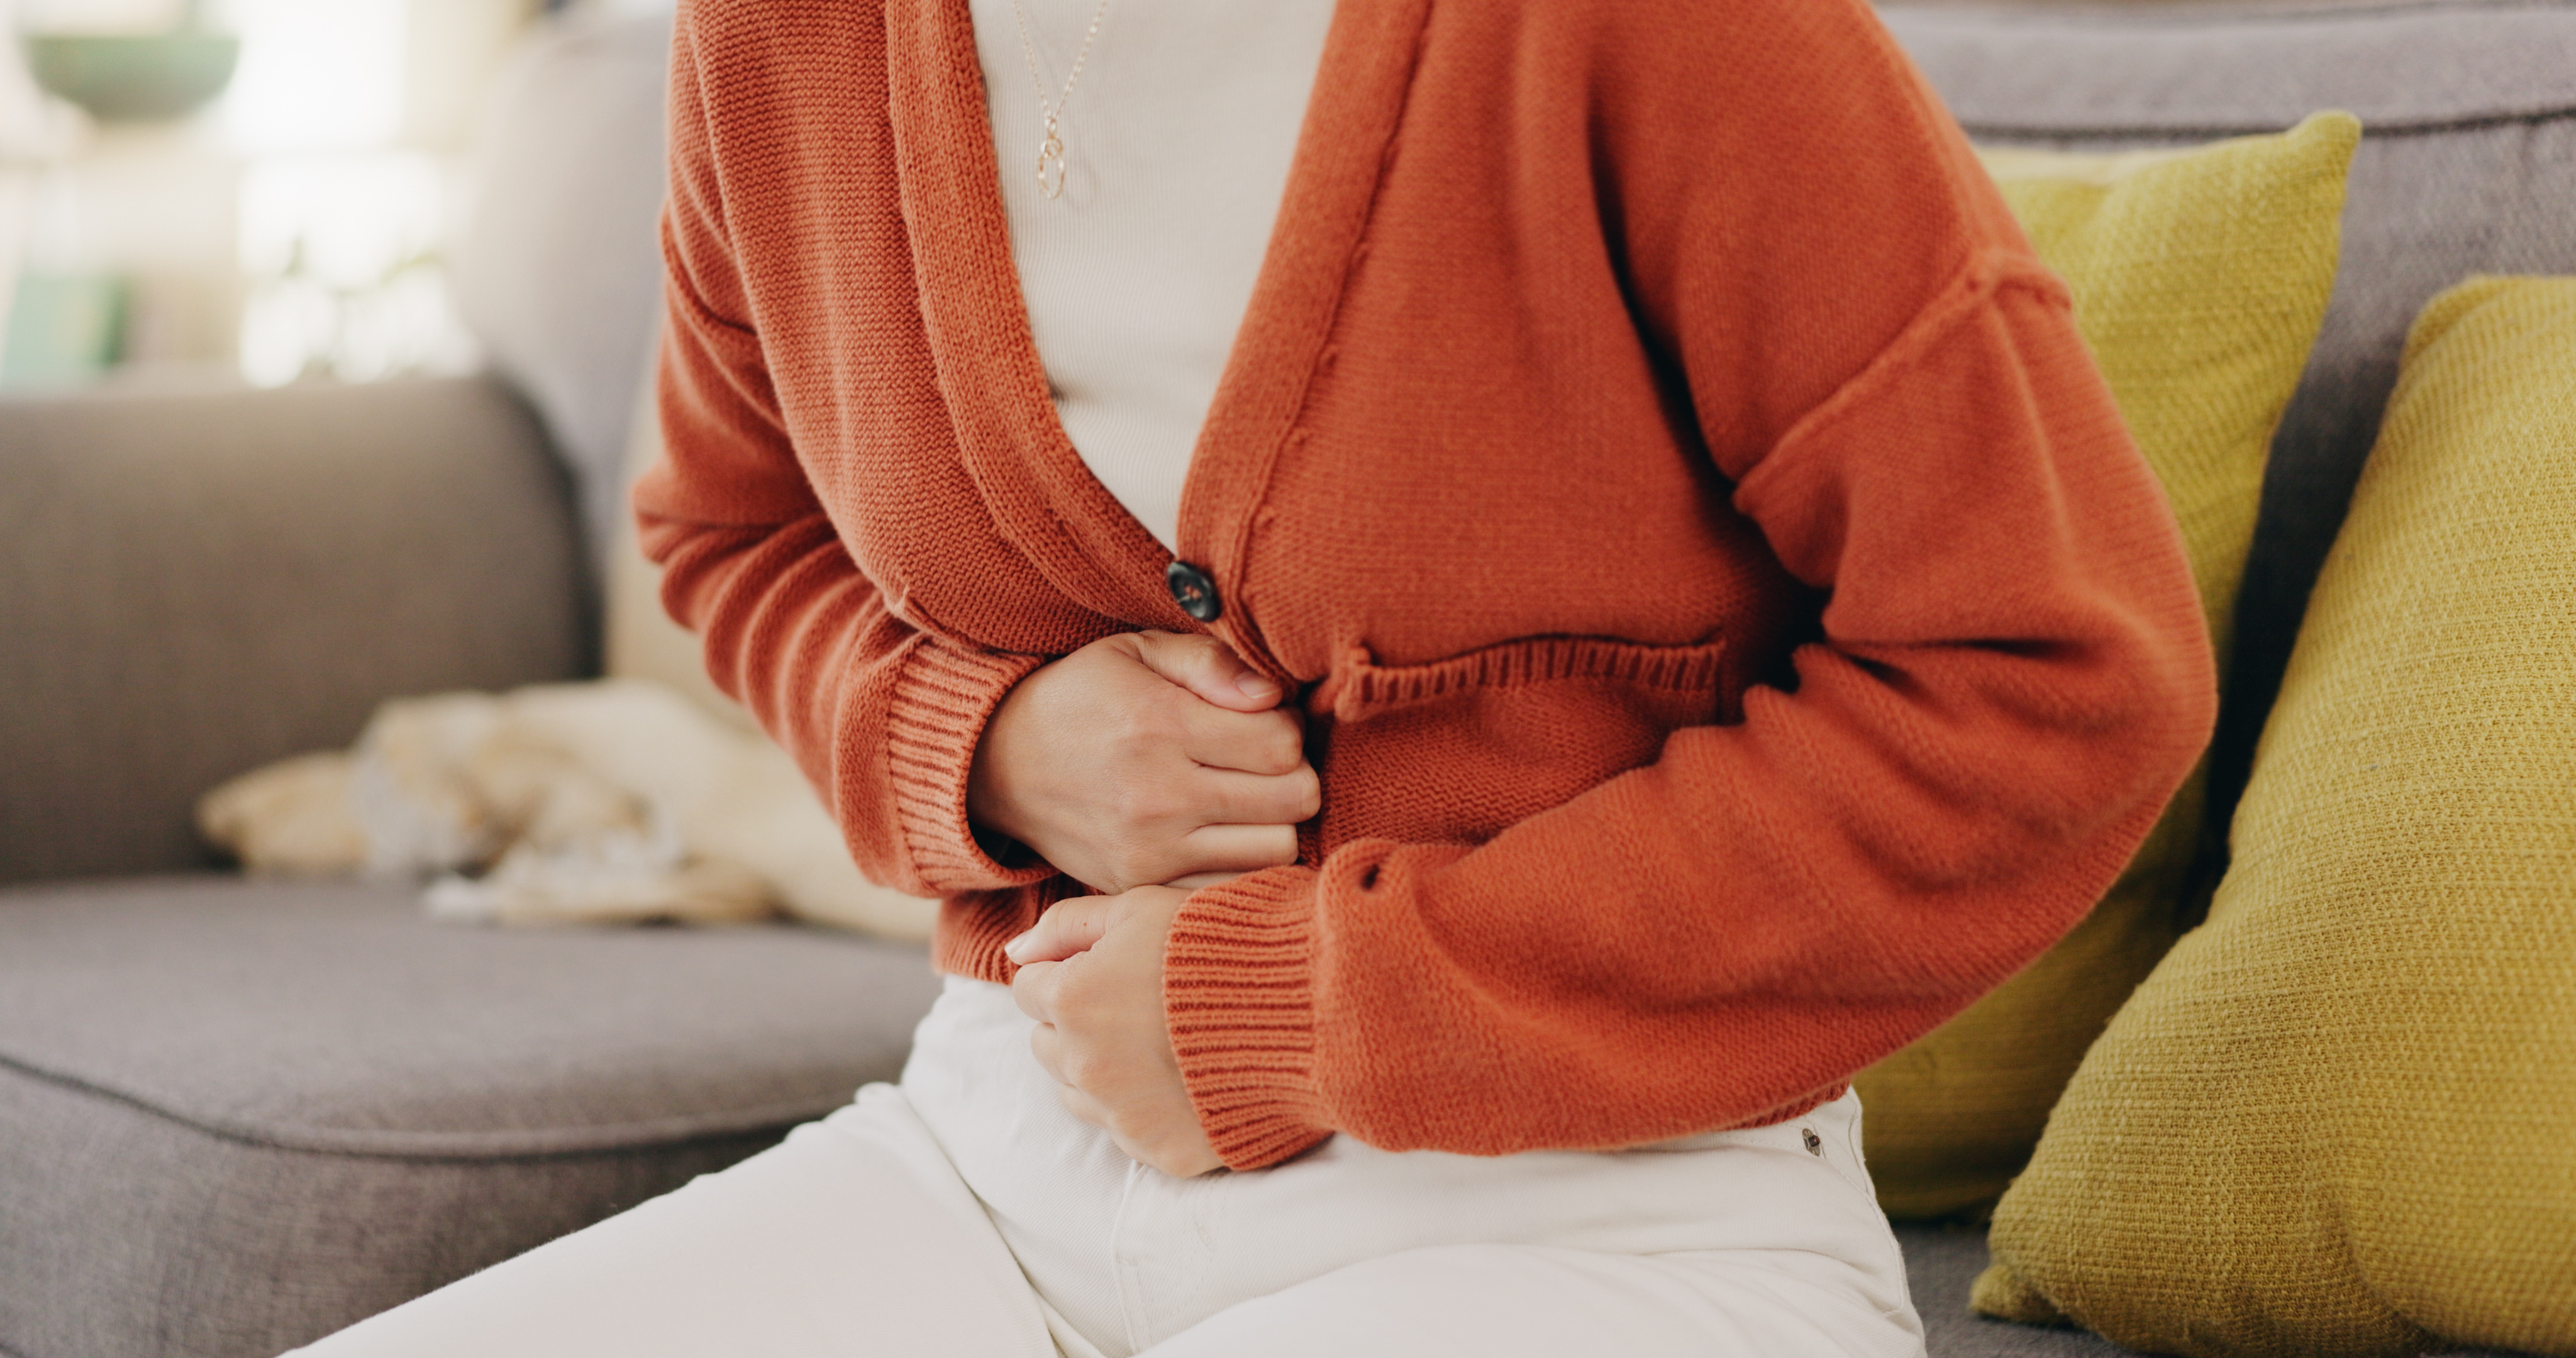 A woman experiencing stomach pain - learn how you can find relief with Vida-Flo's IV hydration treatment for gastrointestinal diseases in Atlanta, GA.